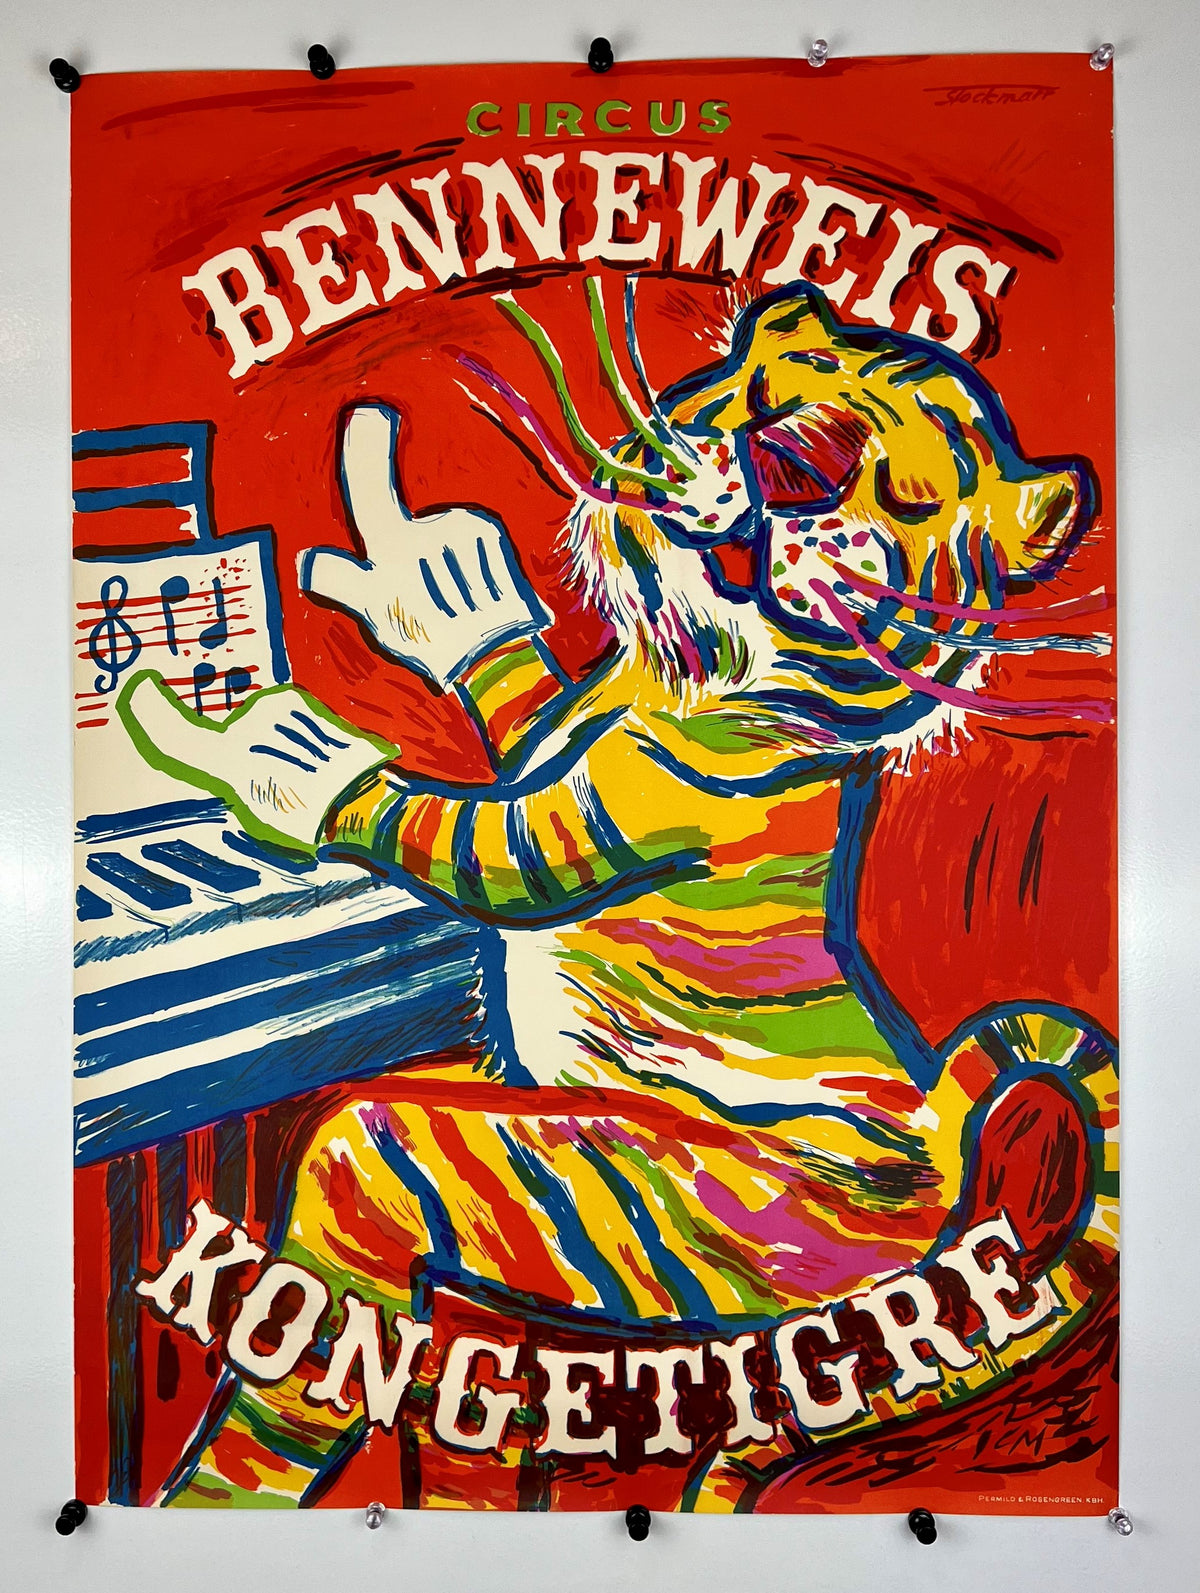 Circus Tiger by Stockmarr - Authentic Vintage Poster